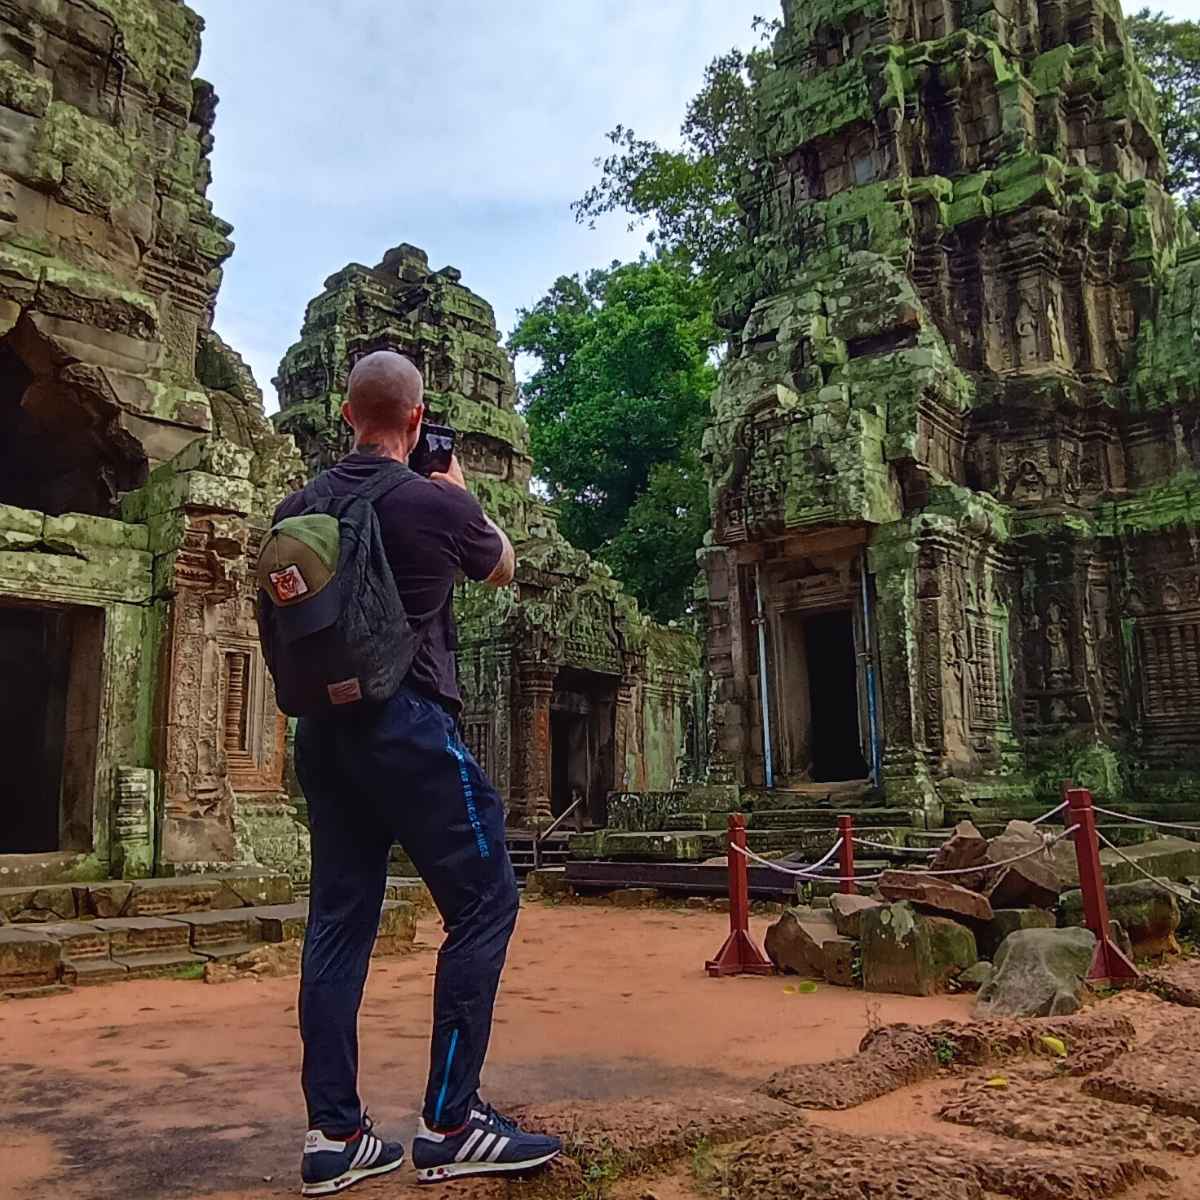 Angkor Dreams & Beyond - Private Siem Reap 5 day tour of Temples, Villages, and Nature.